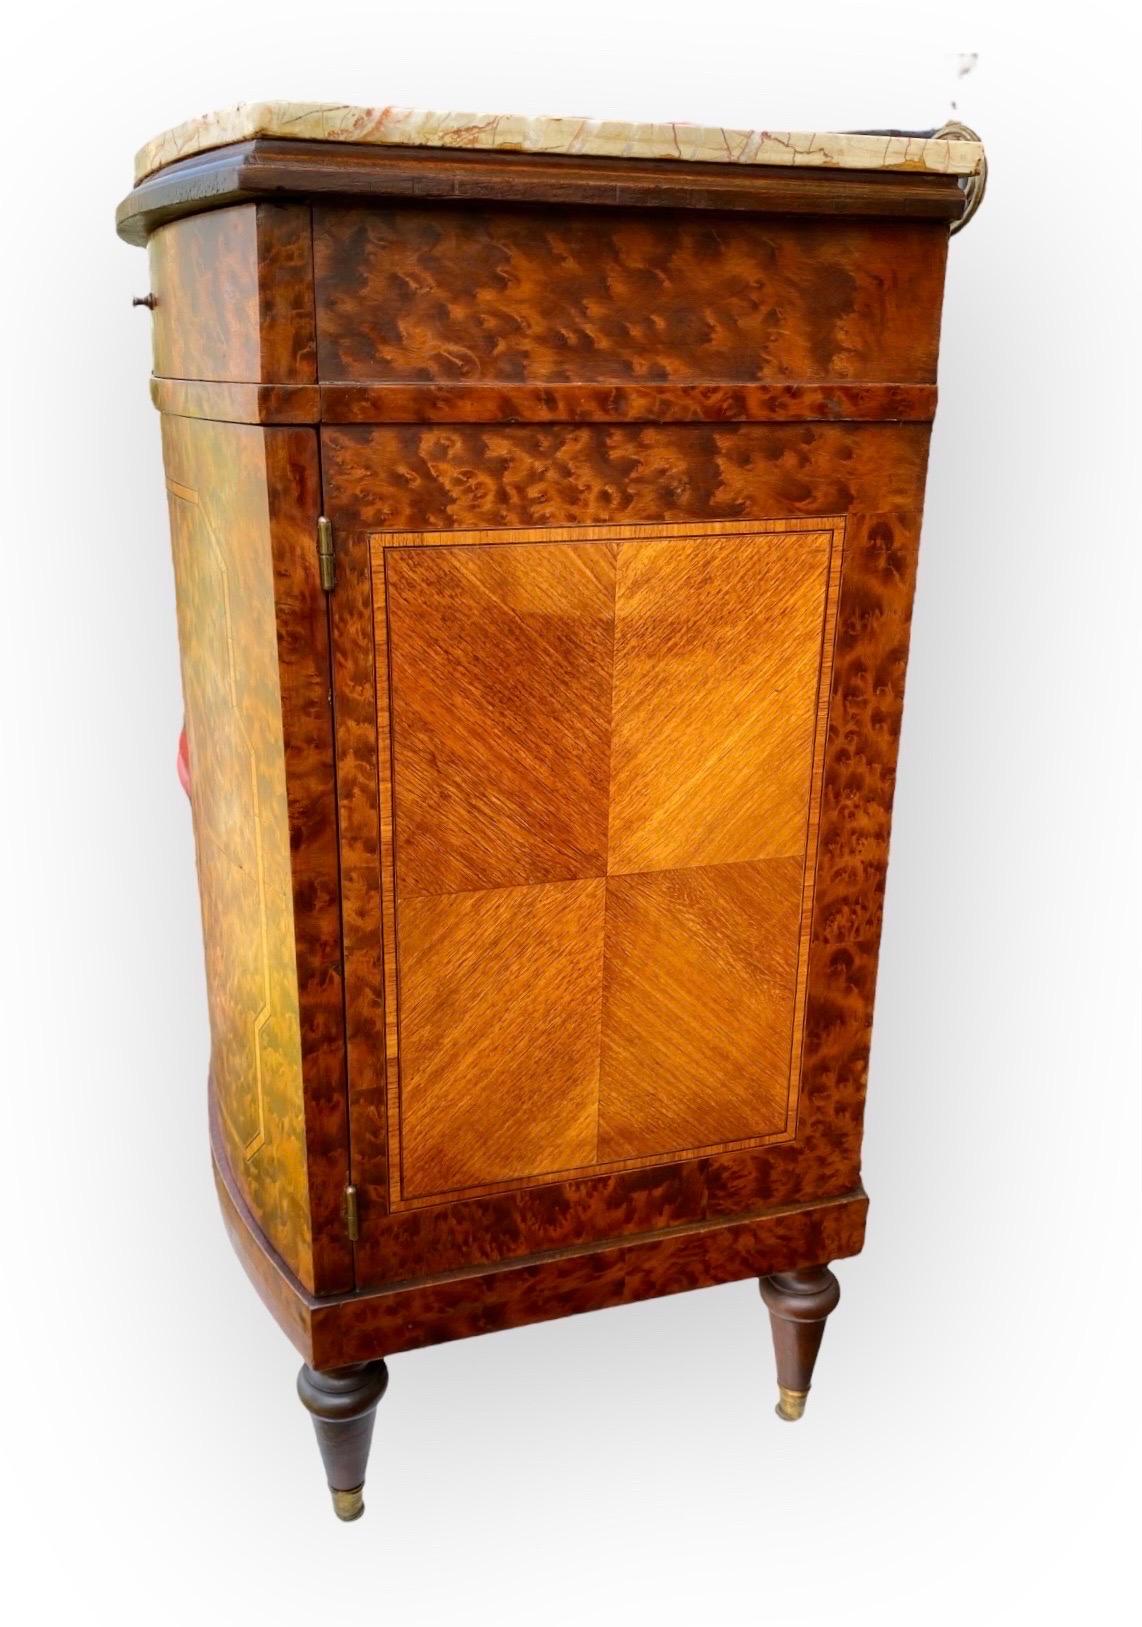 Veneer French Beaux Arts Inlaid Marquetry Burl Walnut Side Cabinet With Marble Tops  For Sale